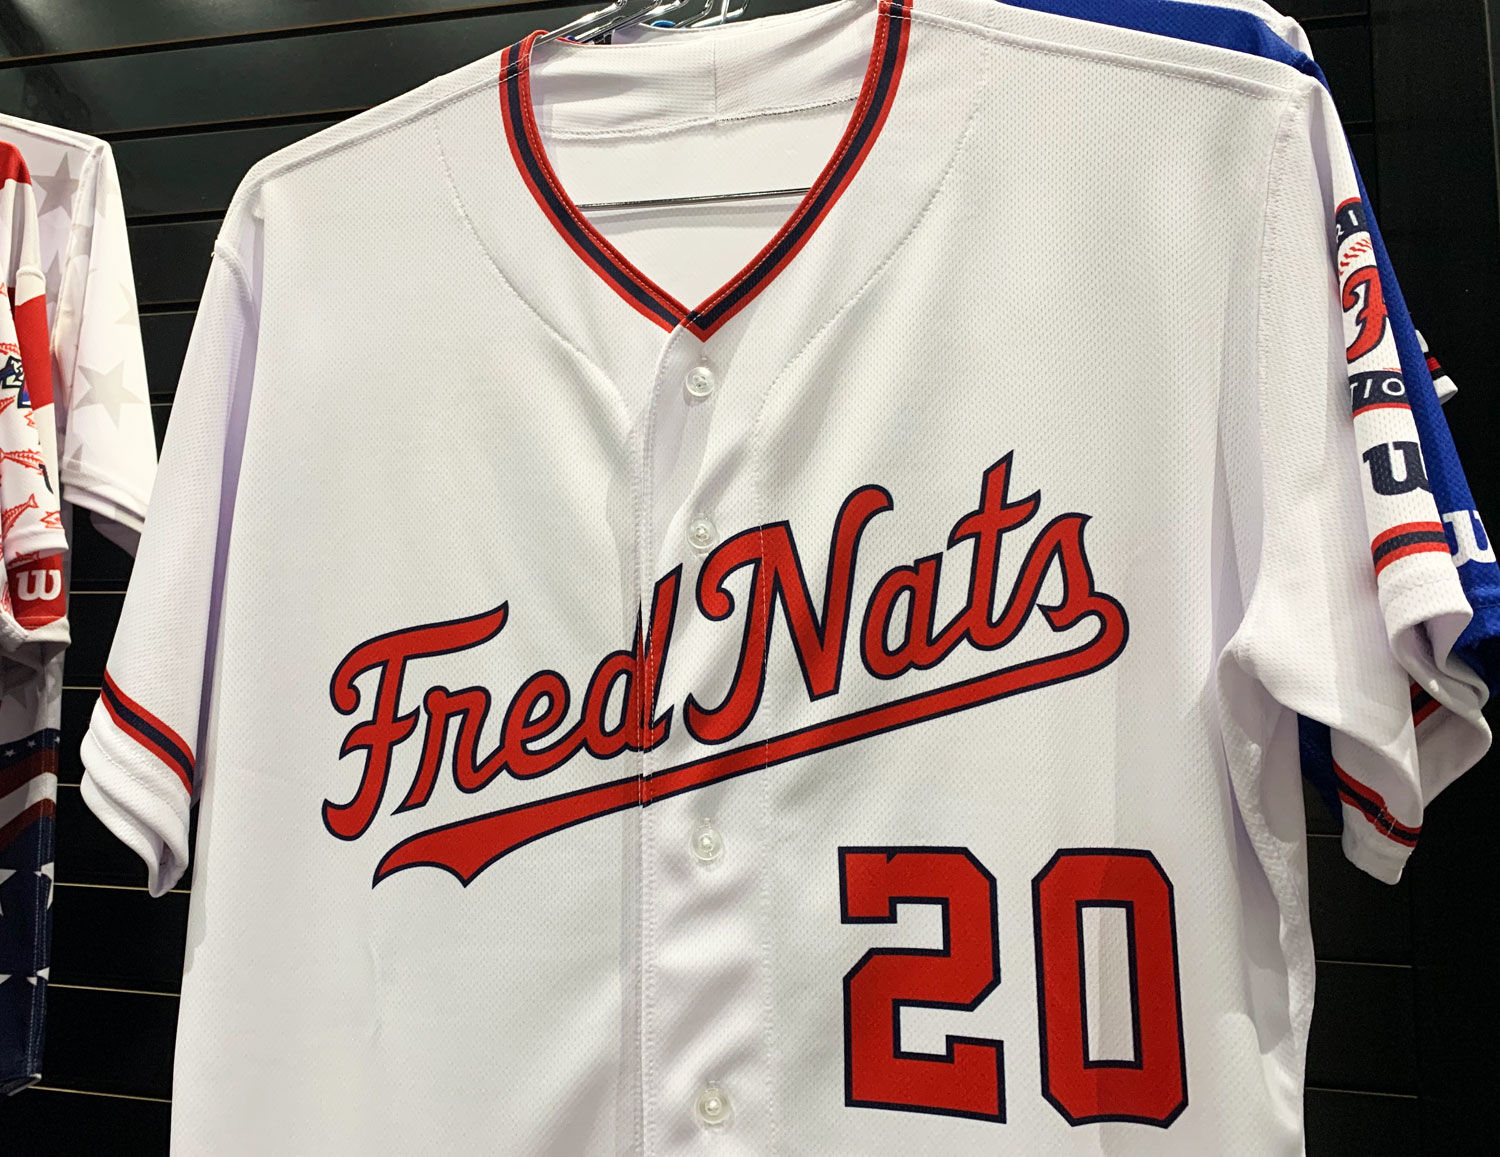 Fredericksburg Nationals (minor league team) who is 0-15 decides to whip  out Harambe jerseys : r/baseball